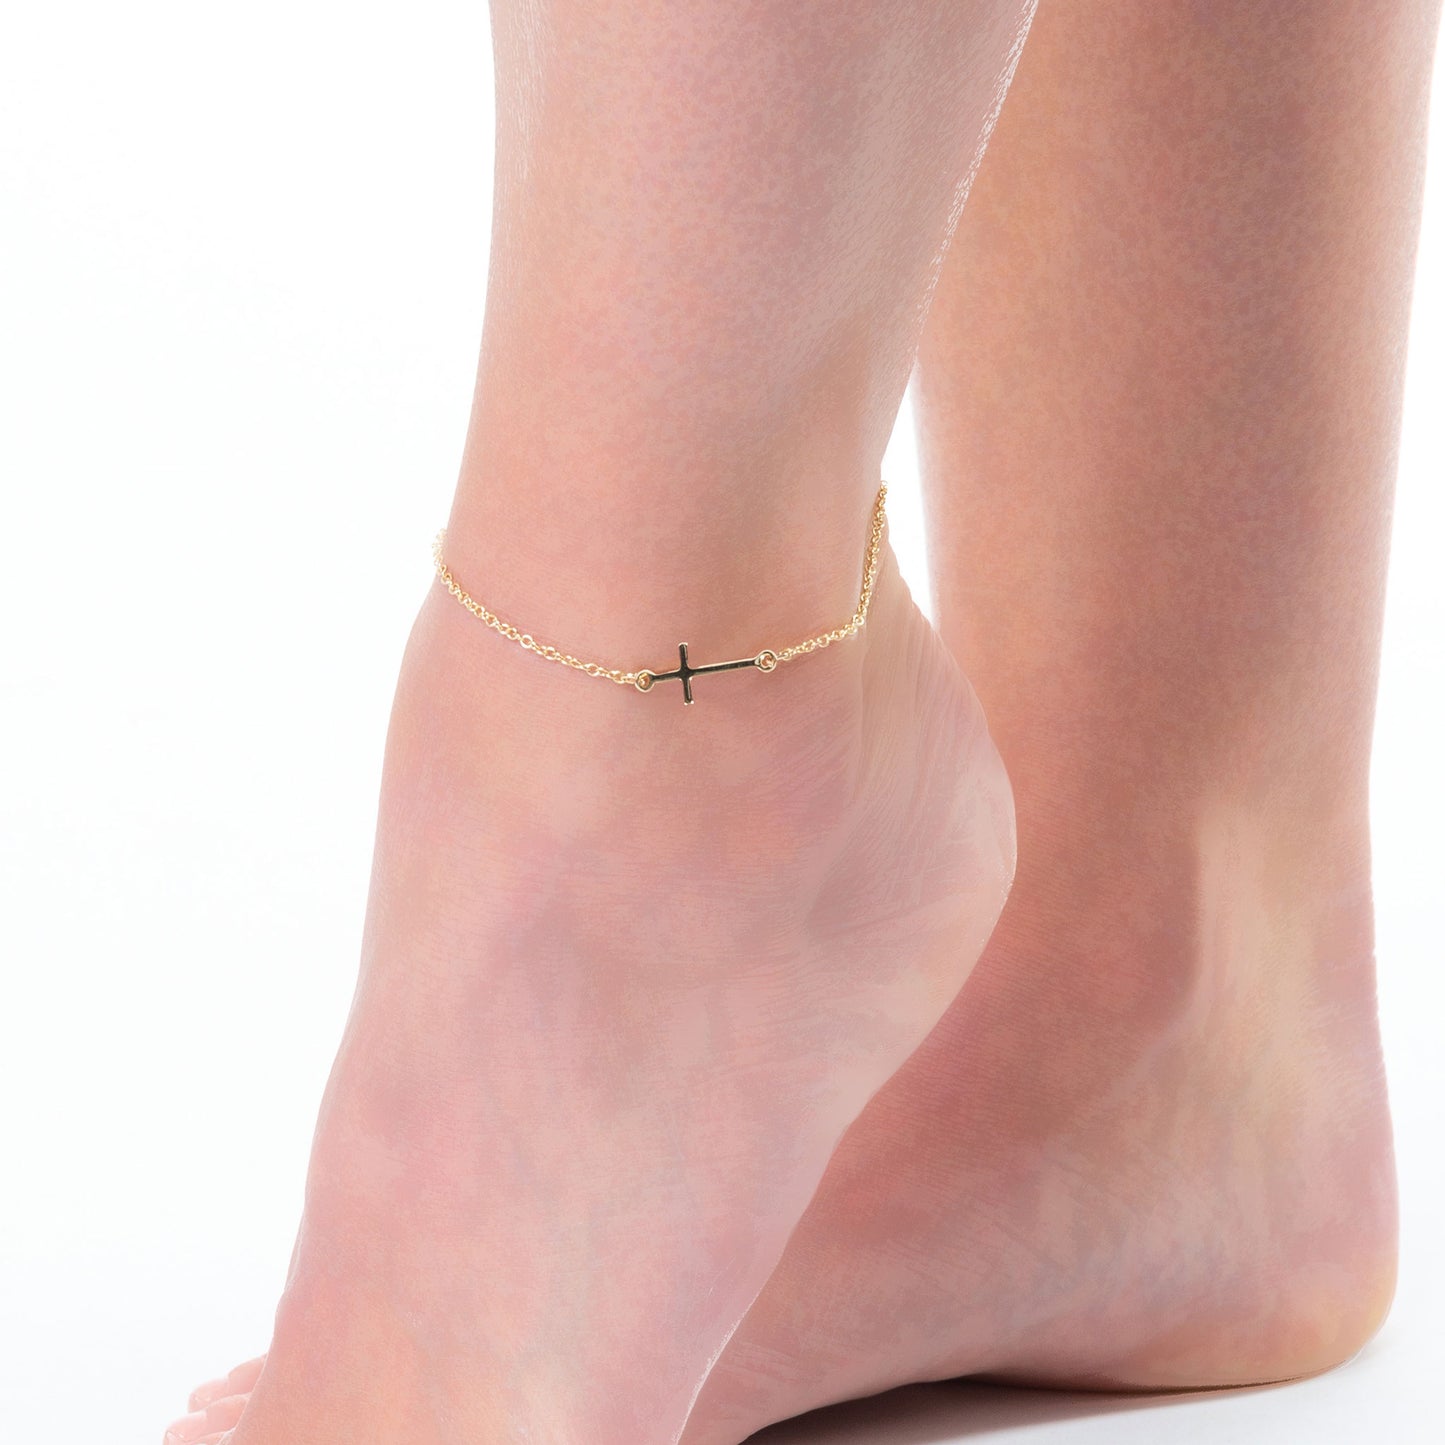 Alexis Cross Charm Anklet